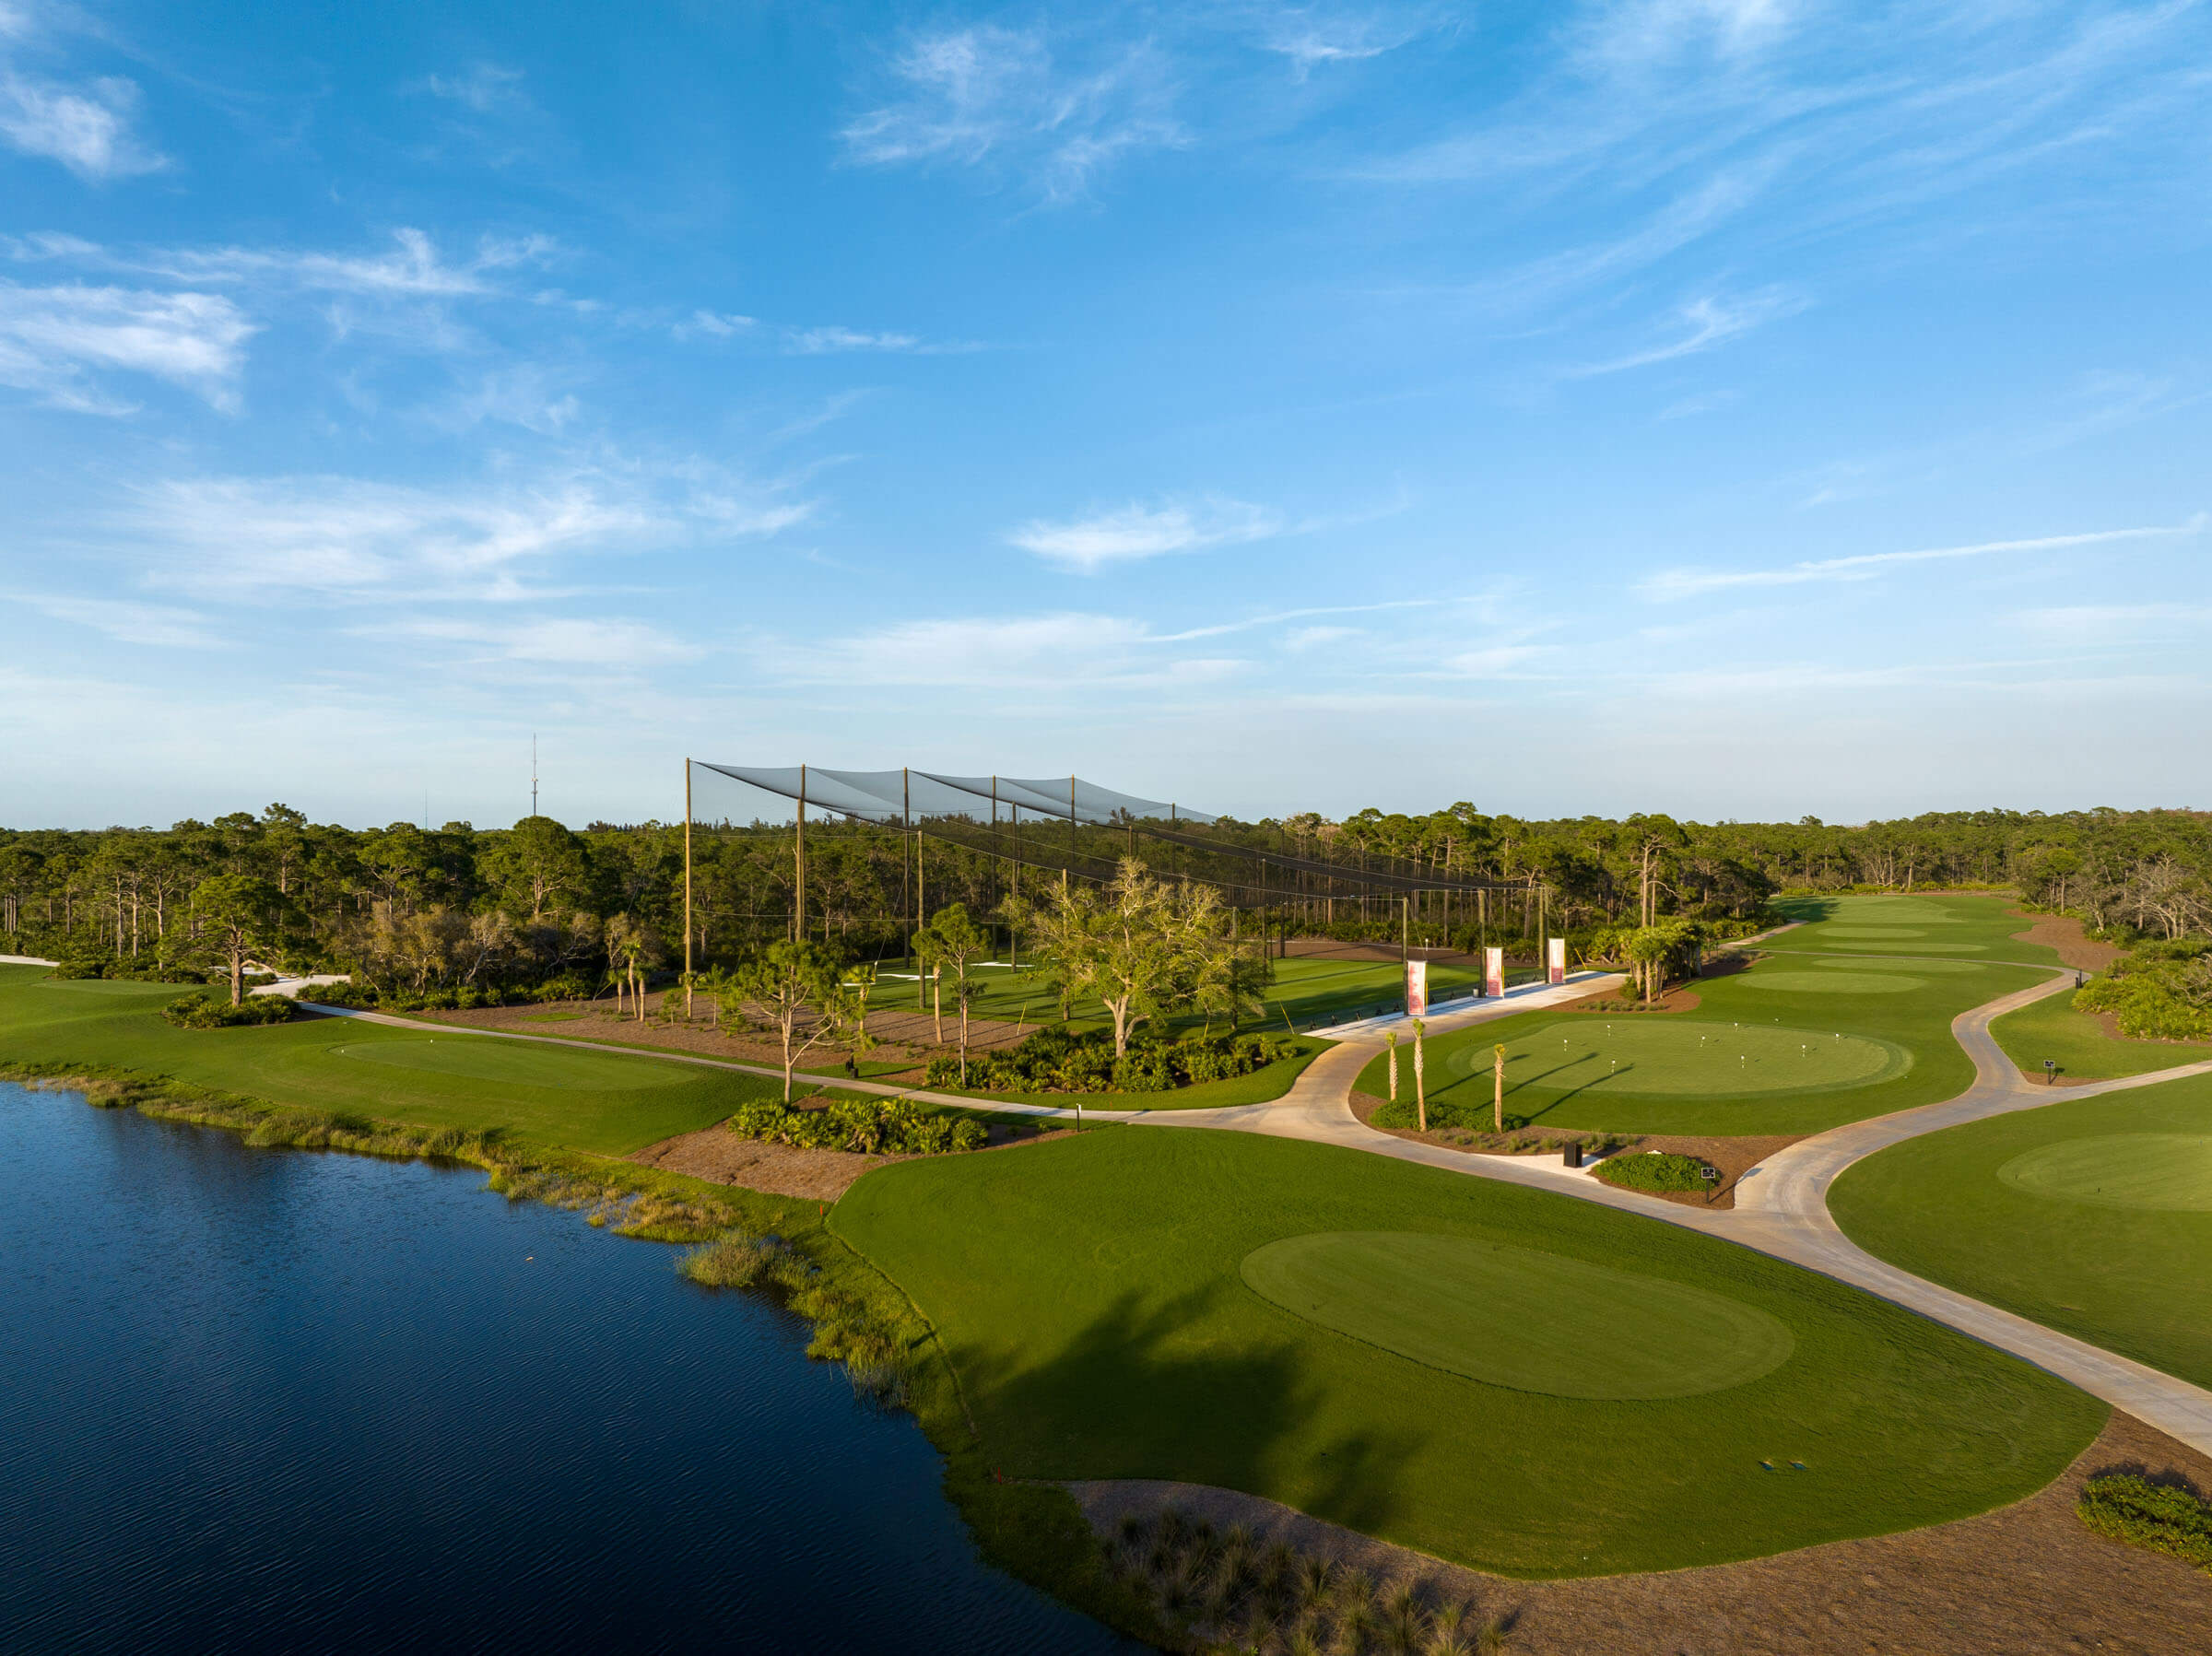 Aerial view of a golf driving range next to a pond with lush greenery and a clear sky.